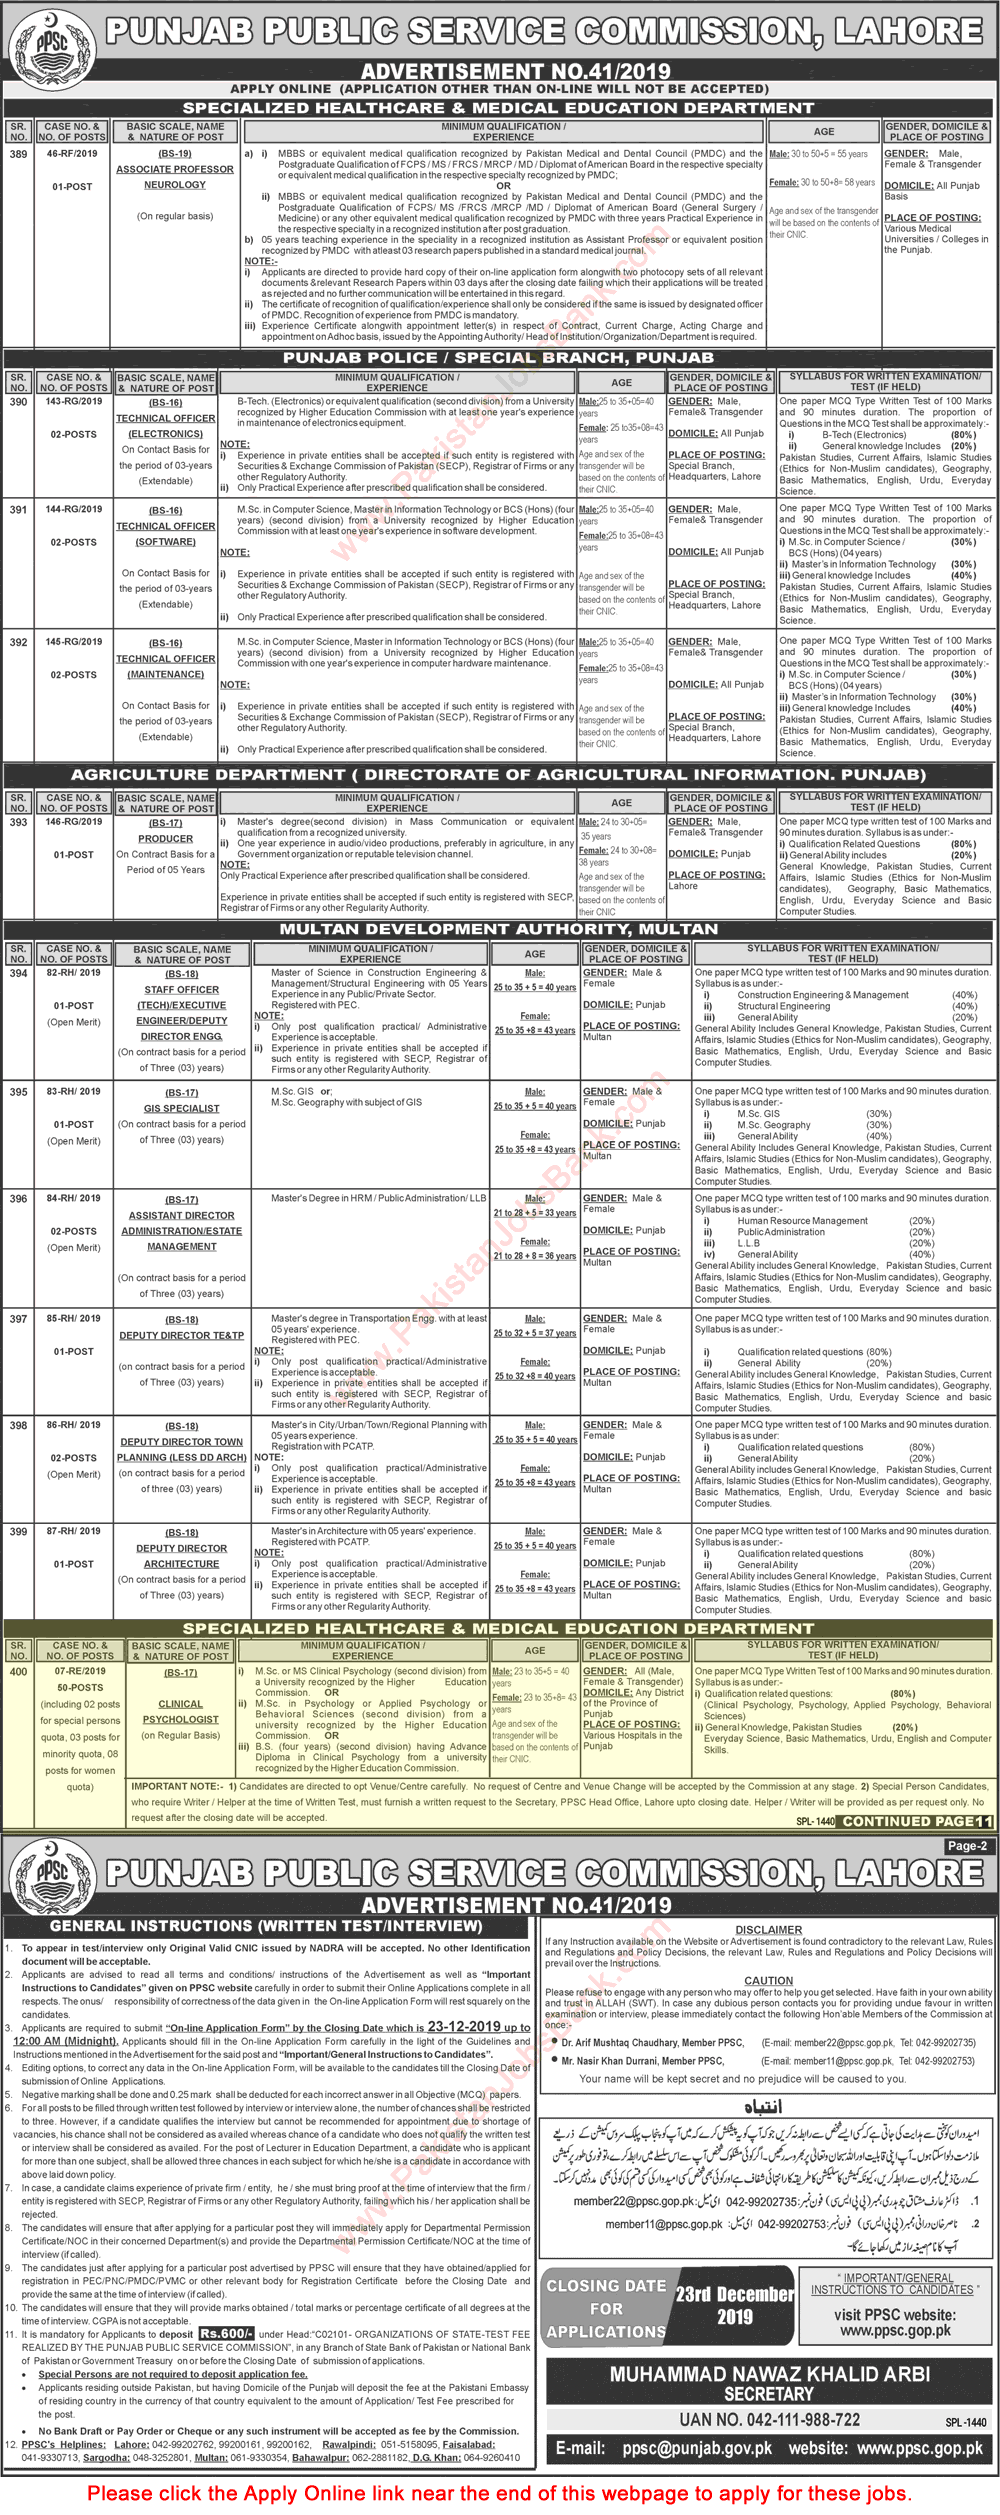 Clinical Psychologist Jobs in Specialized Healthcare & Medical Education Department Punjab 2019 December PPSC Online Apply Latest